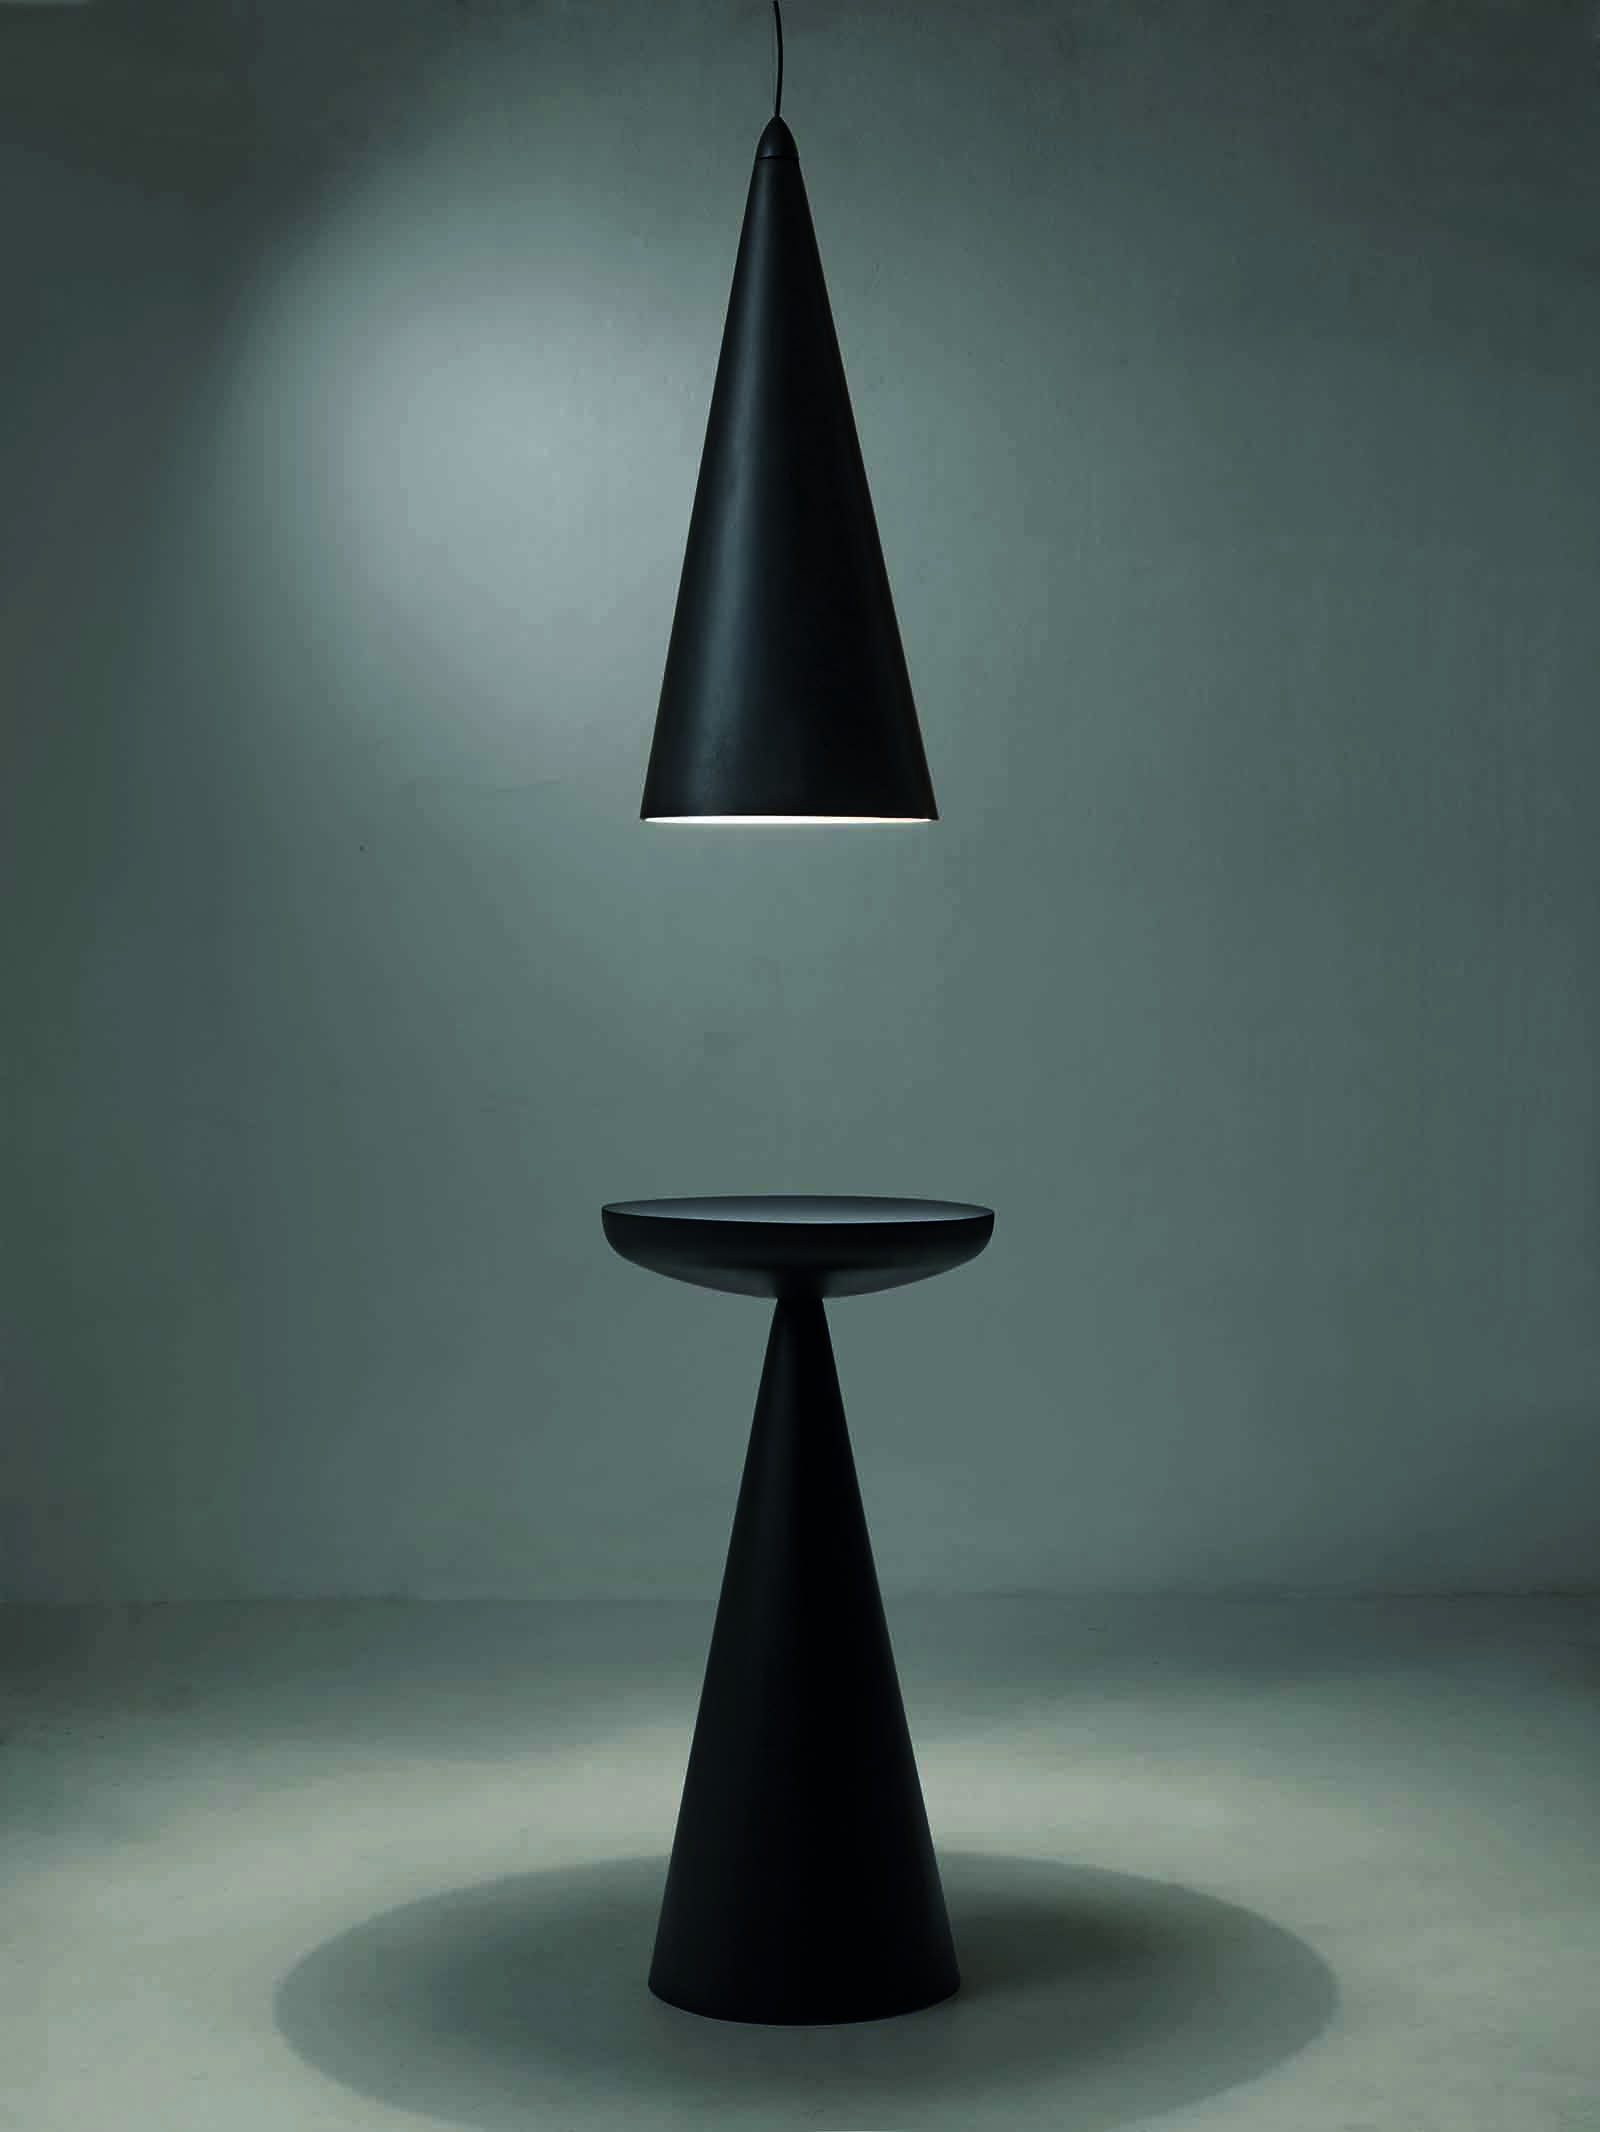 ‘Lume’ pendant and ‘Miss’ table from imperfetto lab